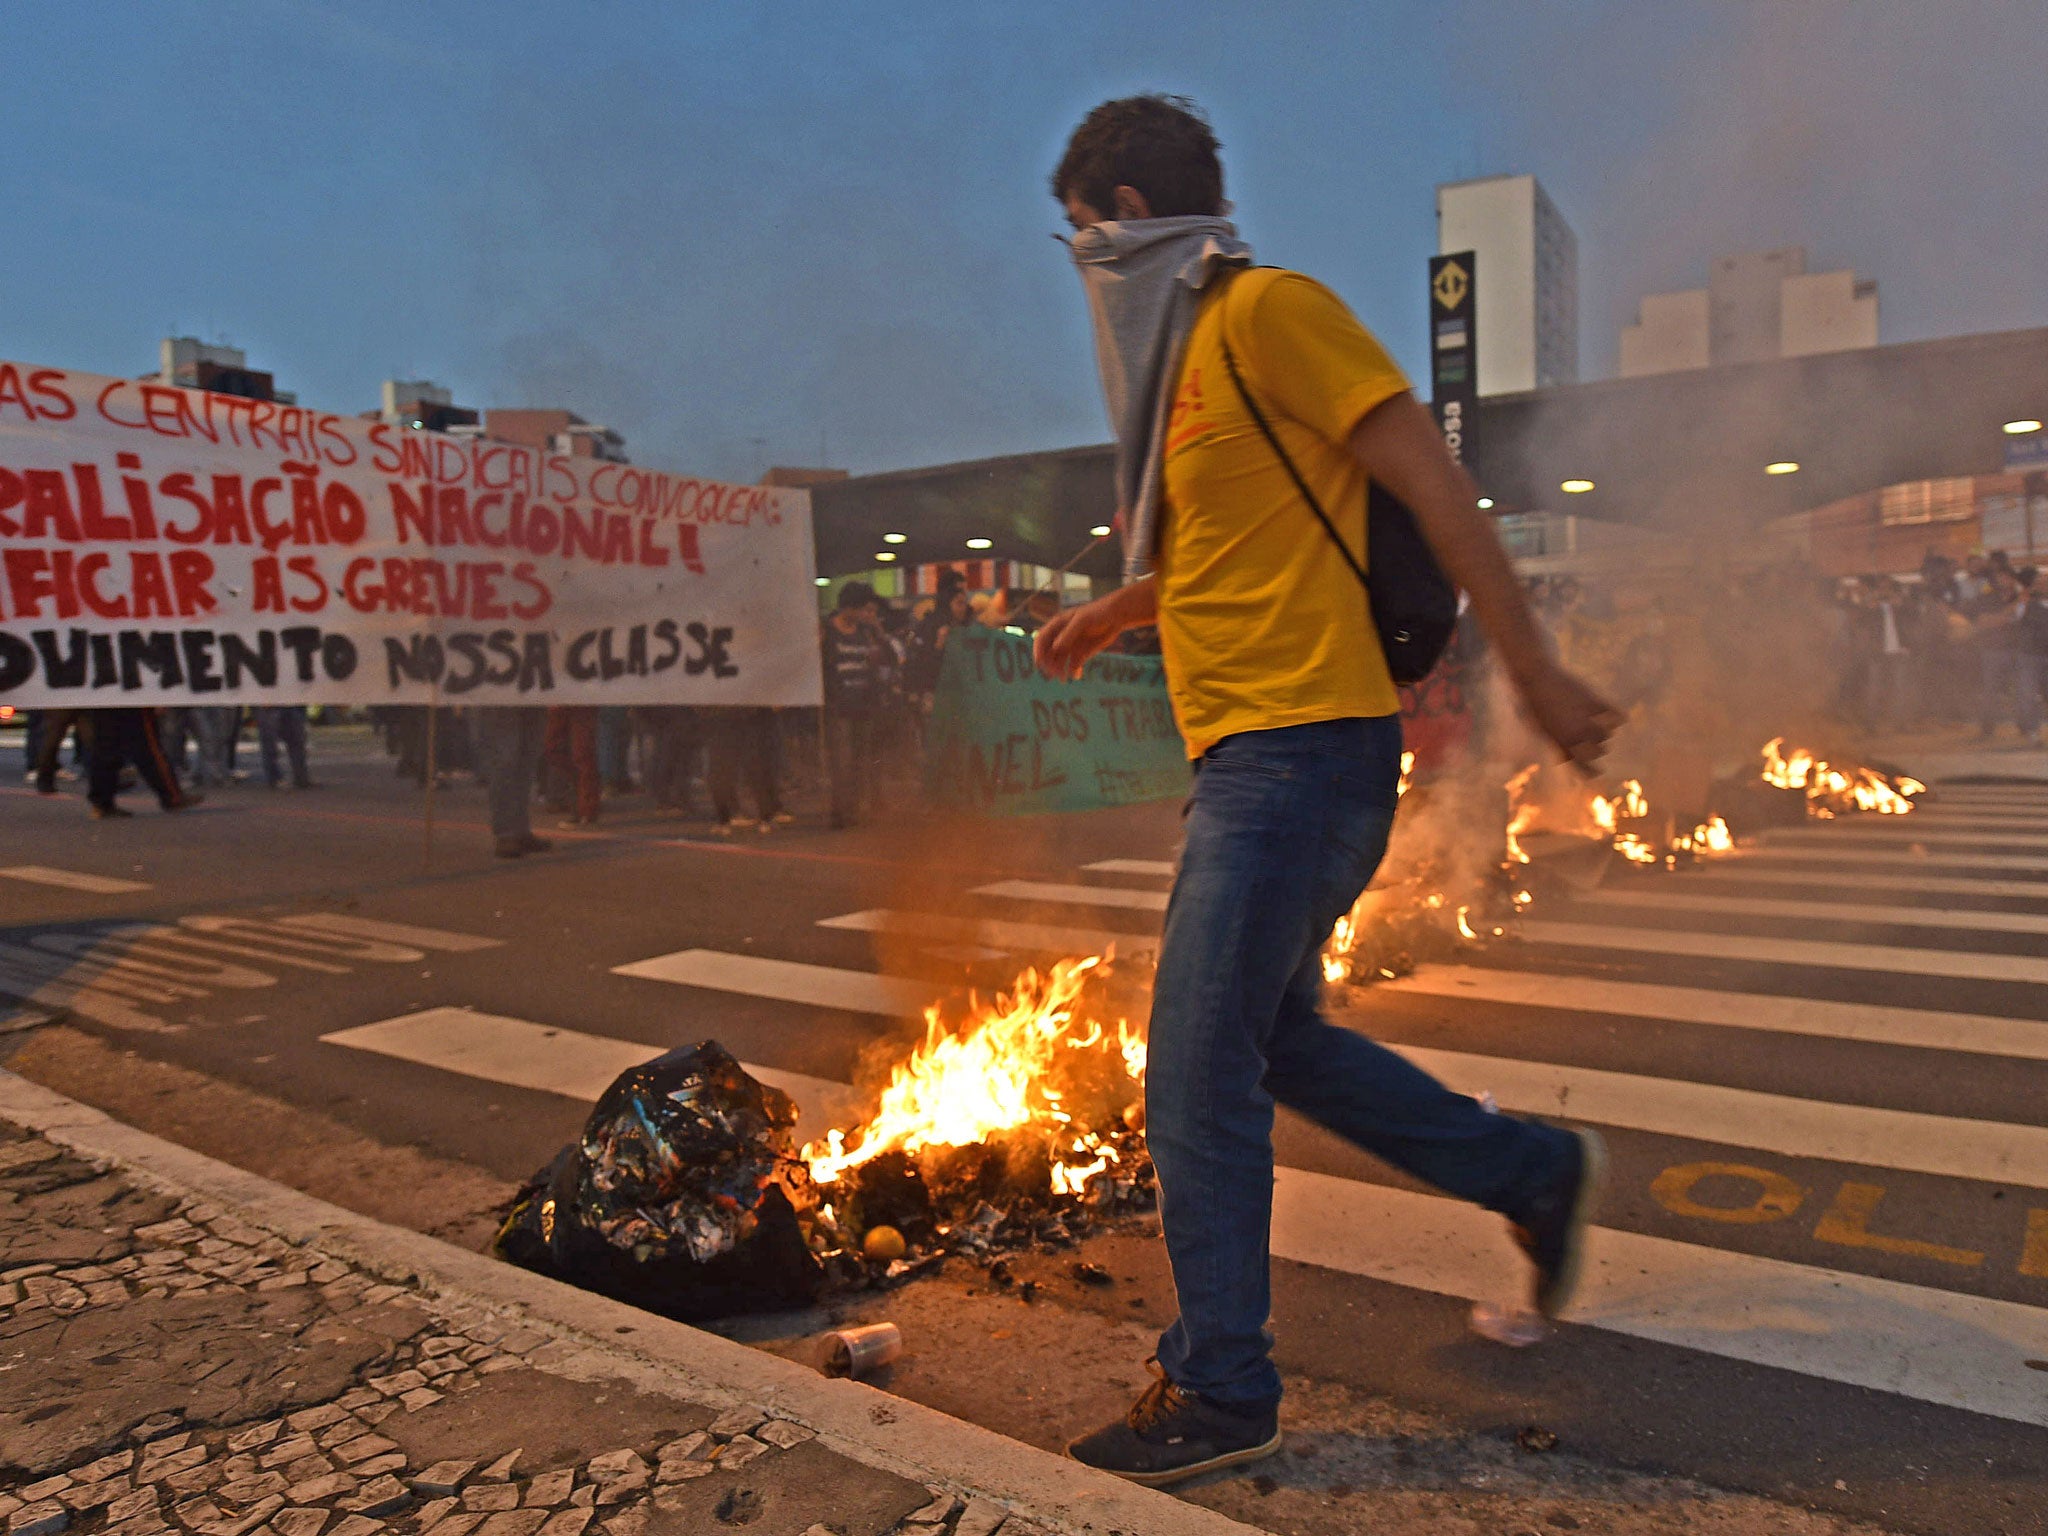 Striking subway workers and members of the MTST (Homeless Workers' Movement), demonstrate on June 9, 2014 in Sao Paulo